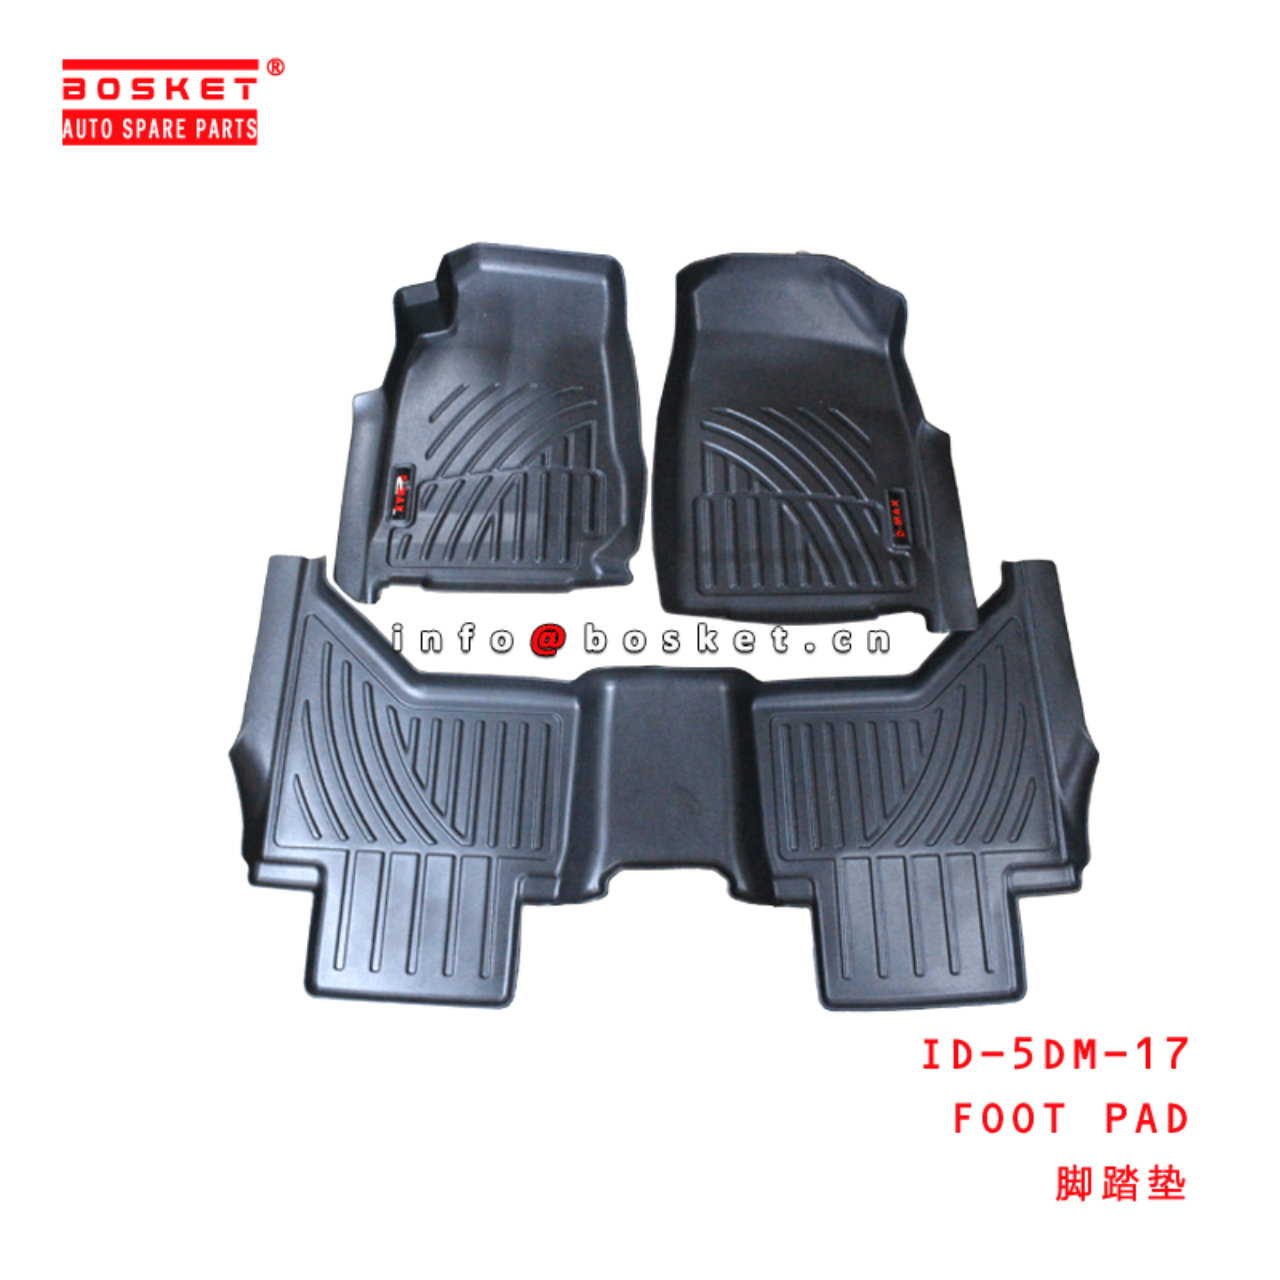  ID-5DM-17 Foot pad Suitable for ISUZU D-MAX 2017